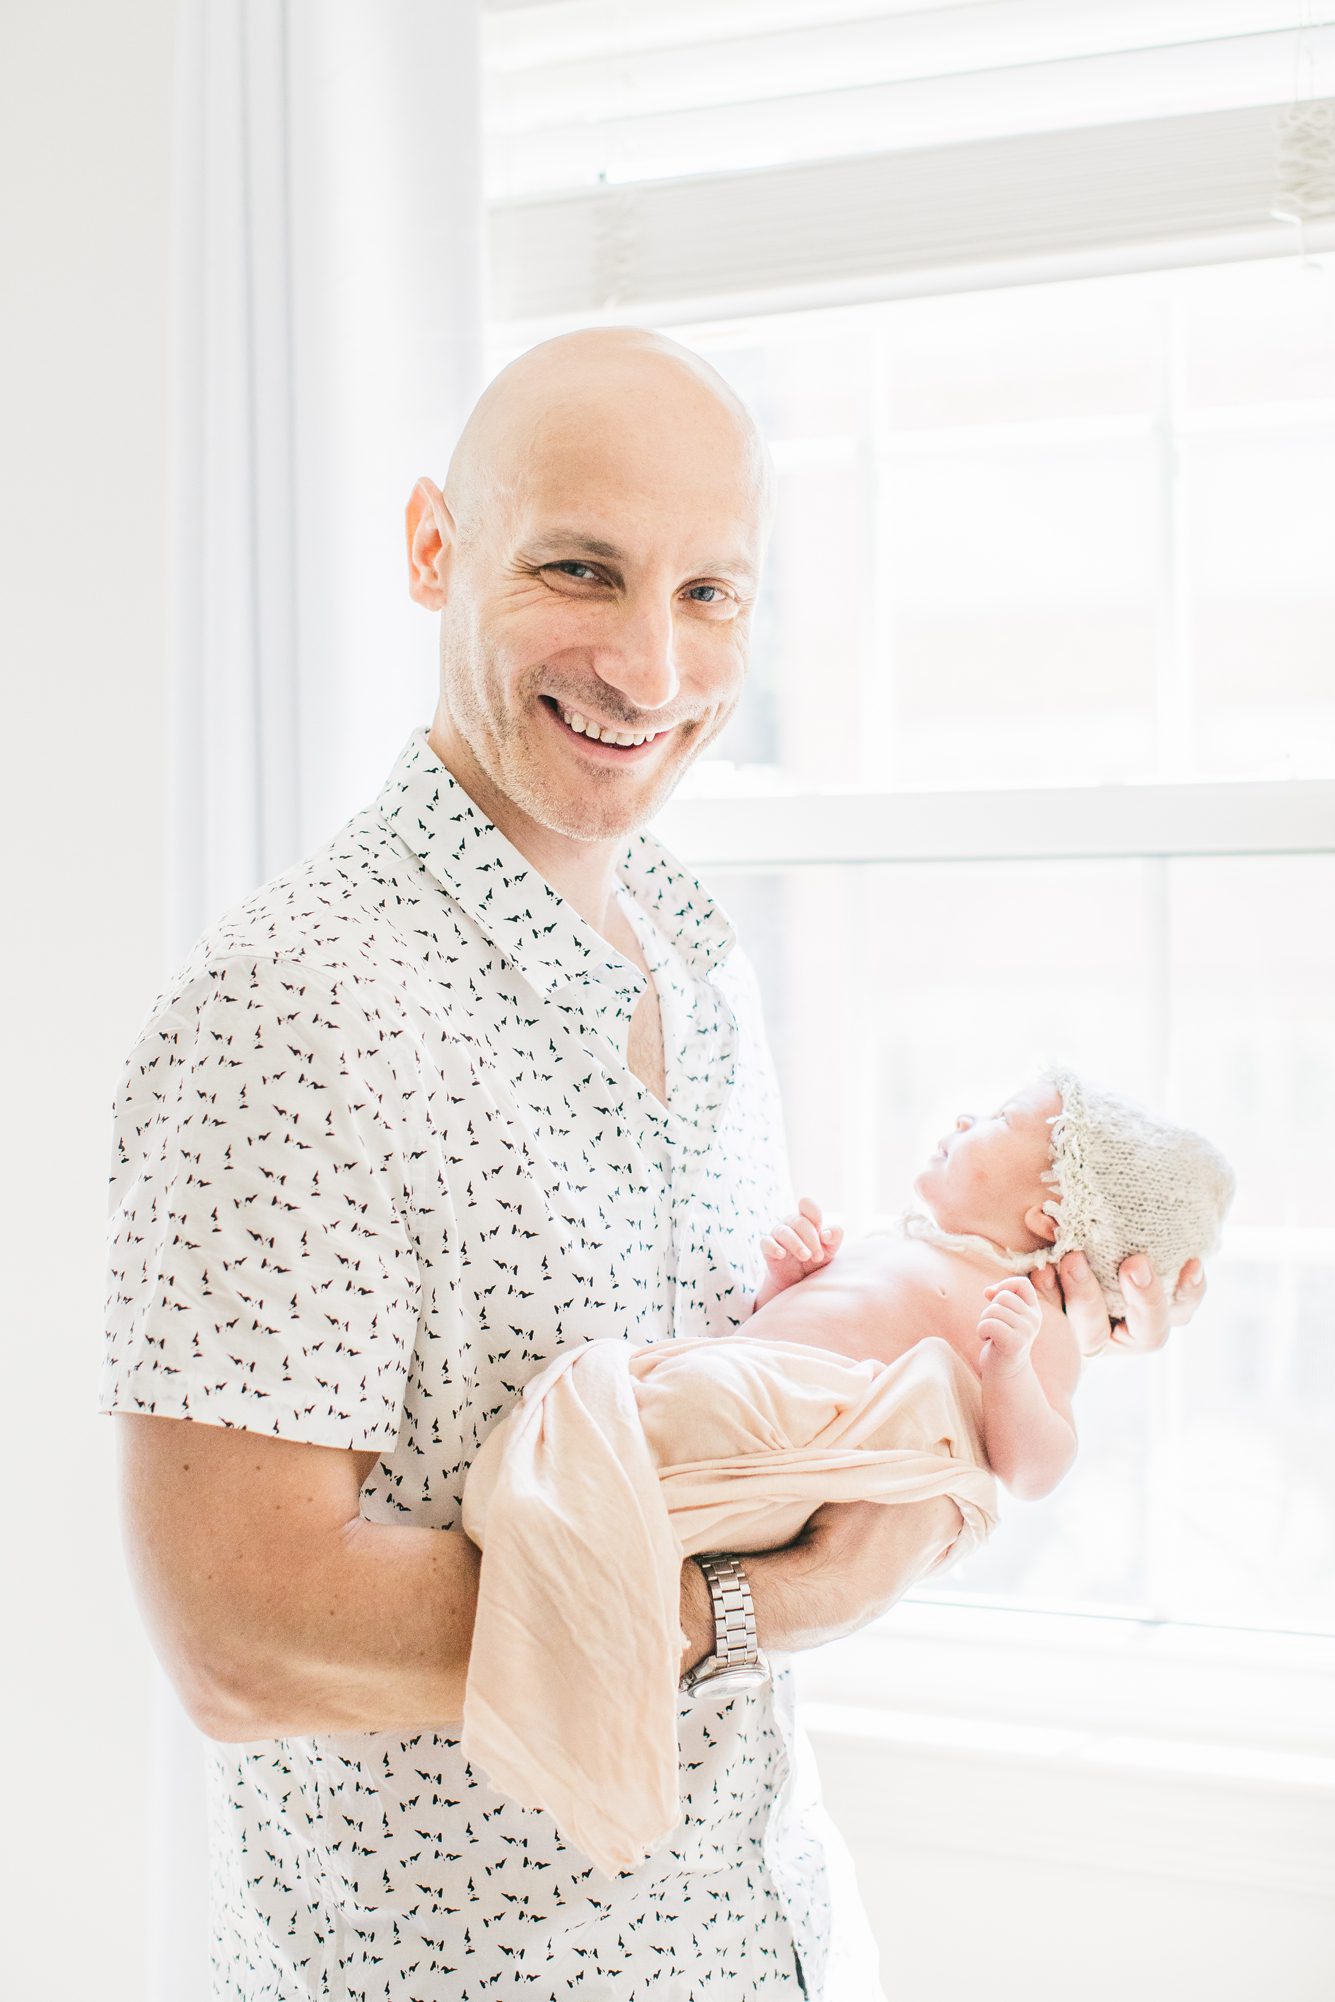 Dad smiling at camera while holding baby near window light. Photo by LRG Portraits.